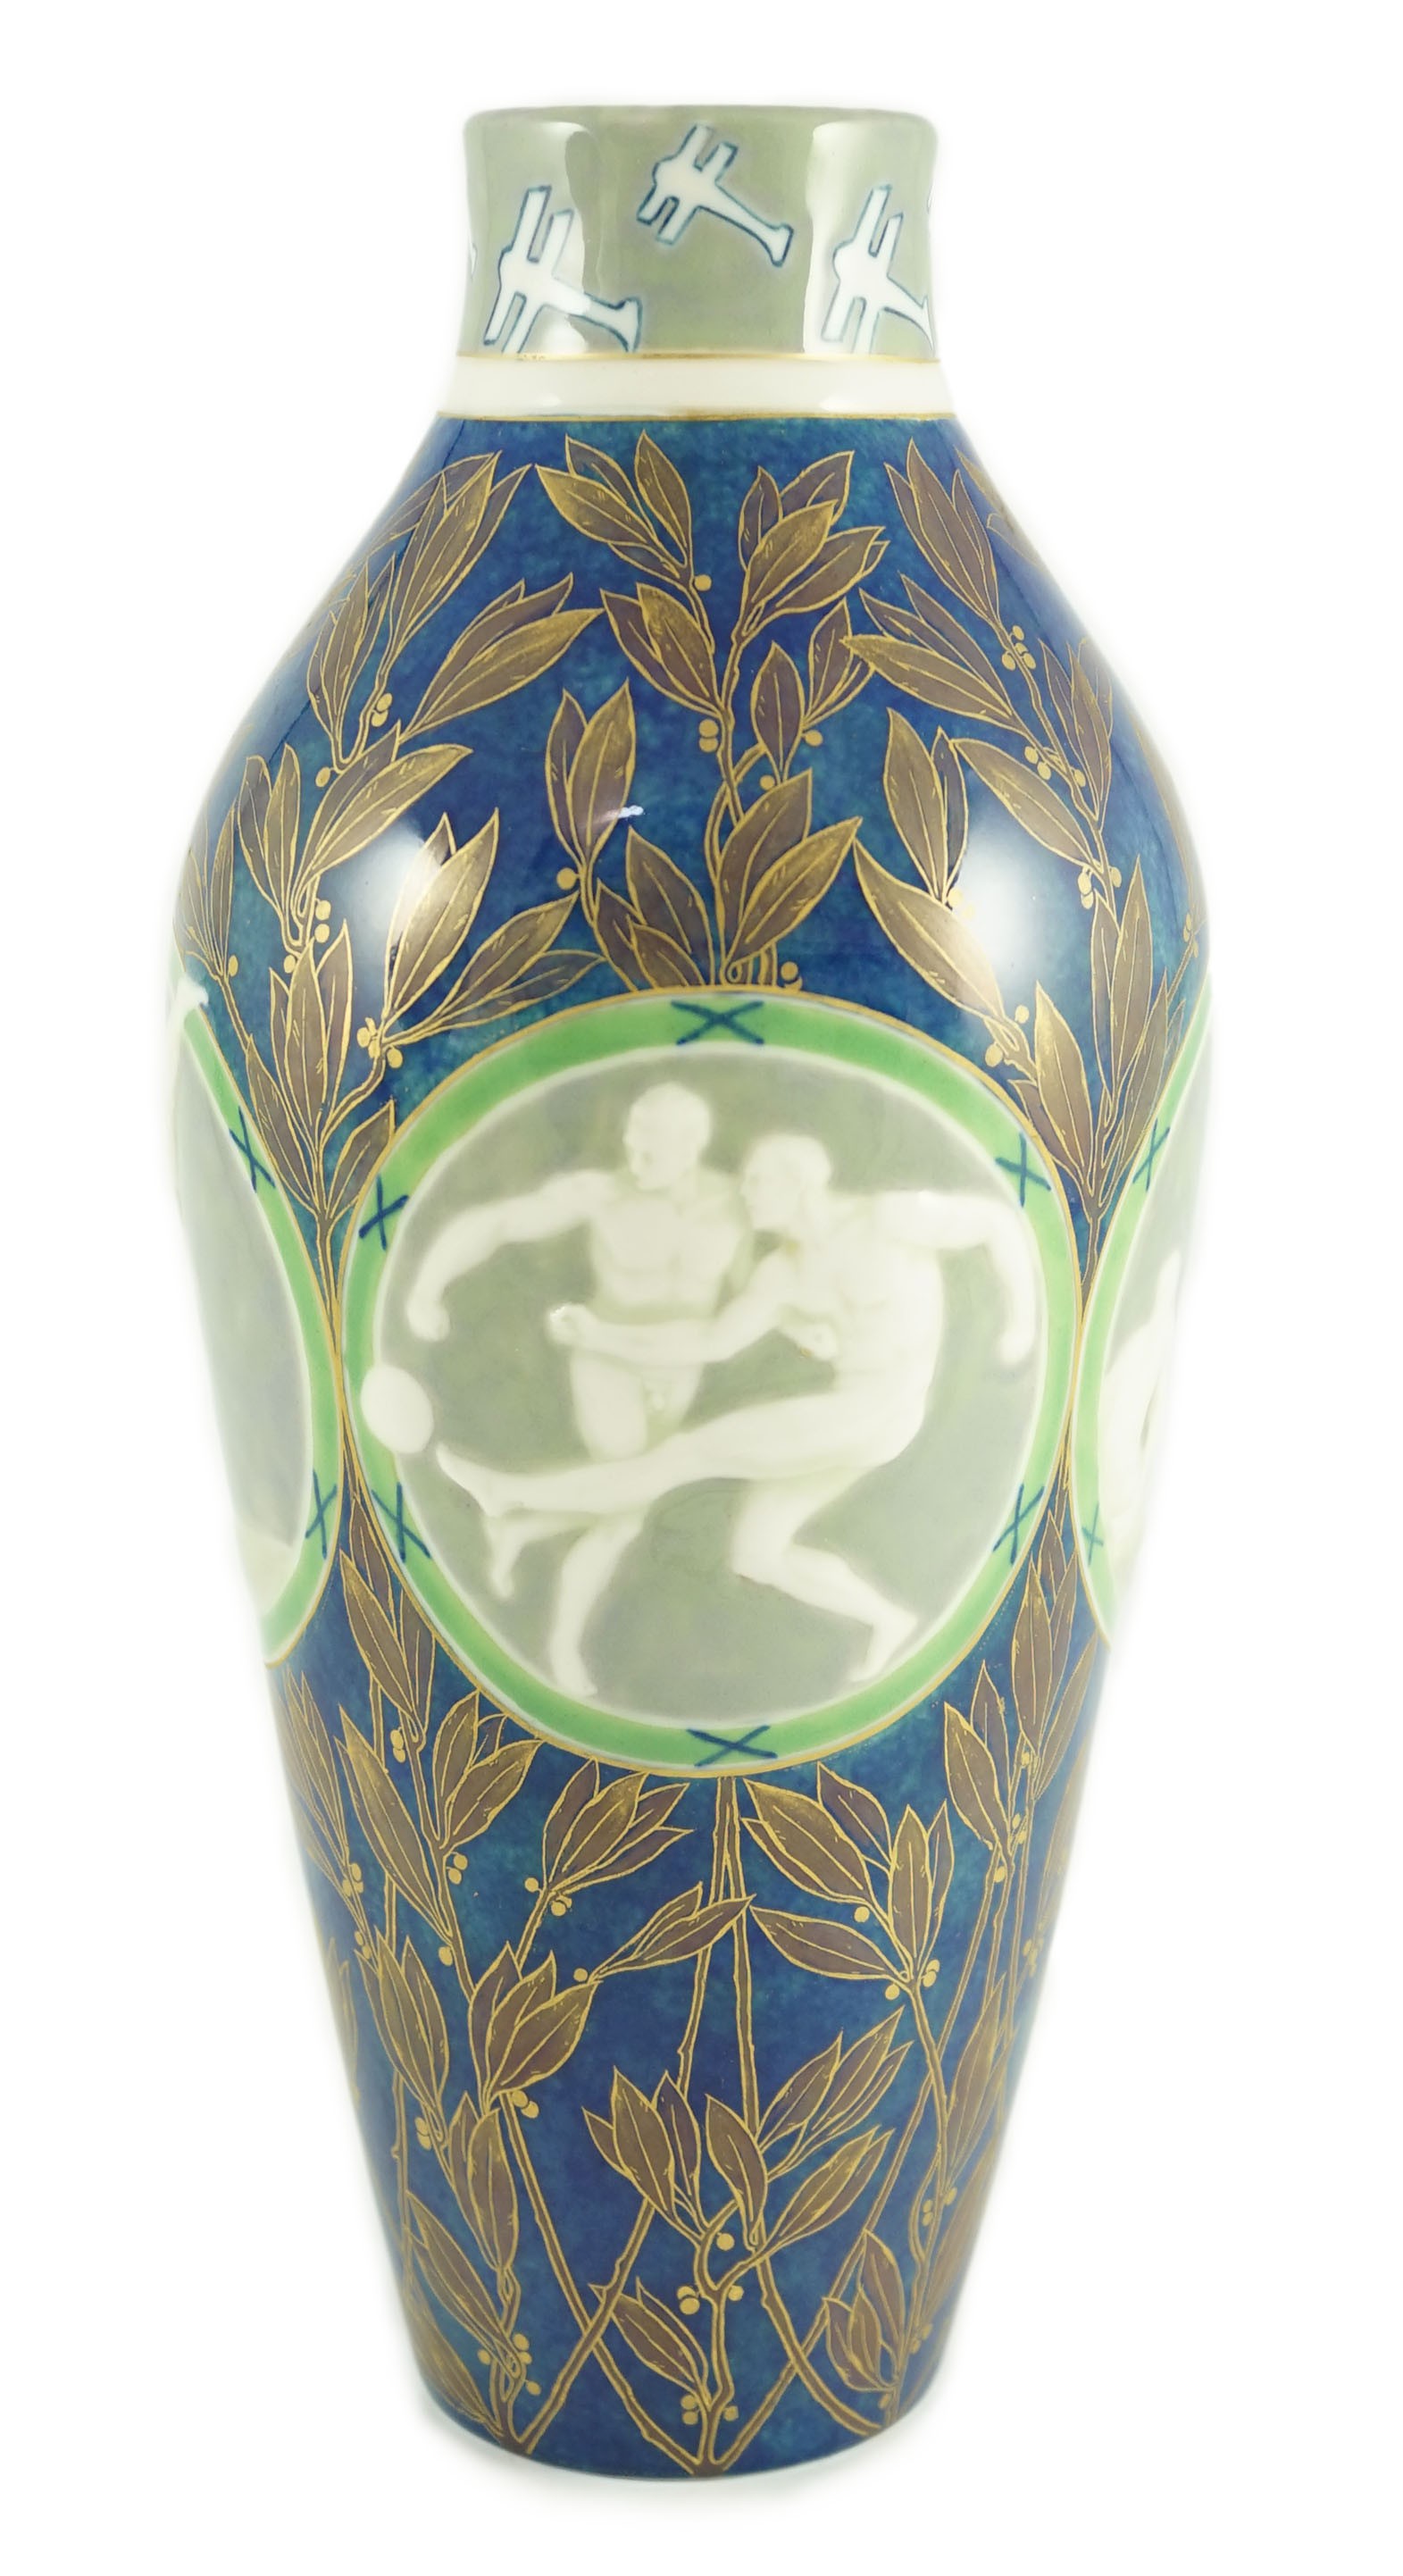 A good Sevres pate-sur-pate vase, presented to Gold Medal winners at the 1924 Paris Olympics, designed by Guillonet, executed by Bracquemond, 33.5cm high